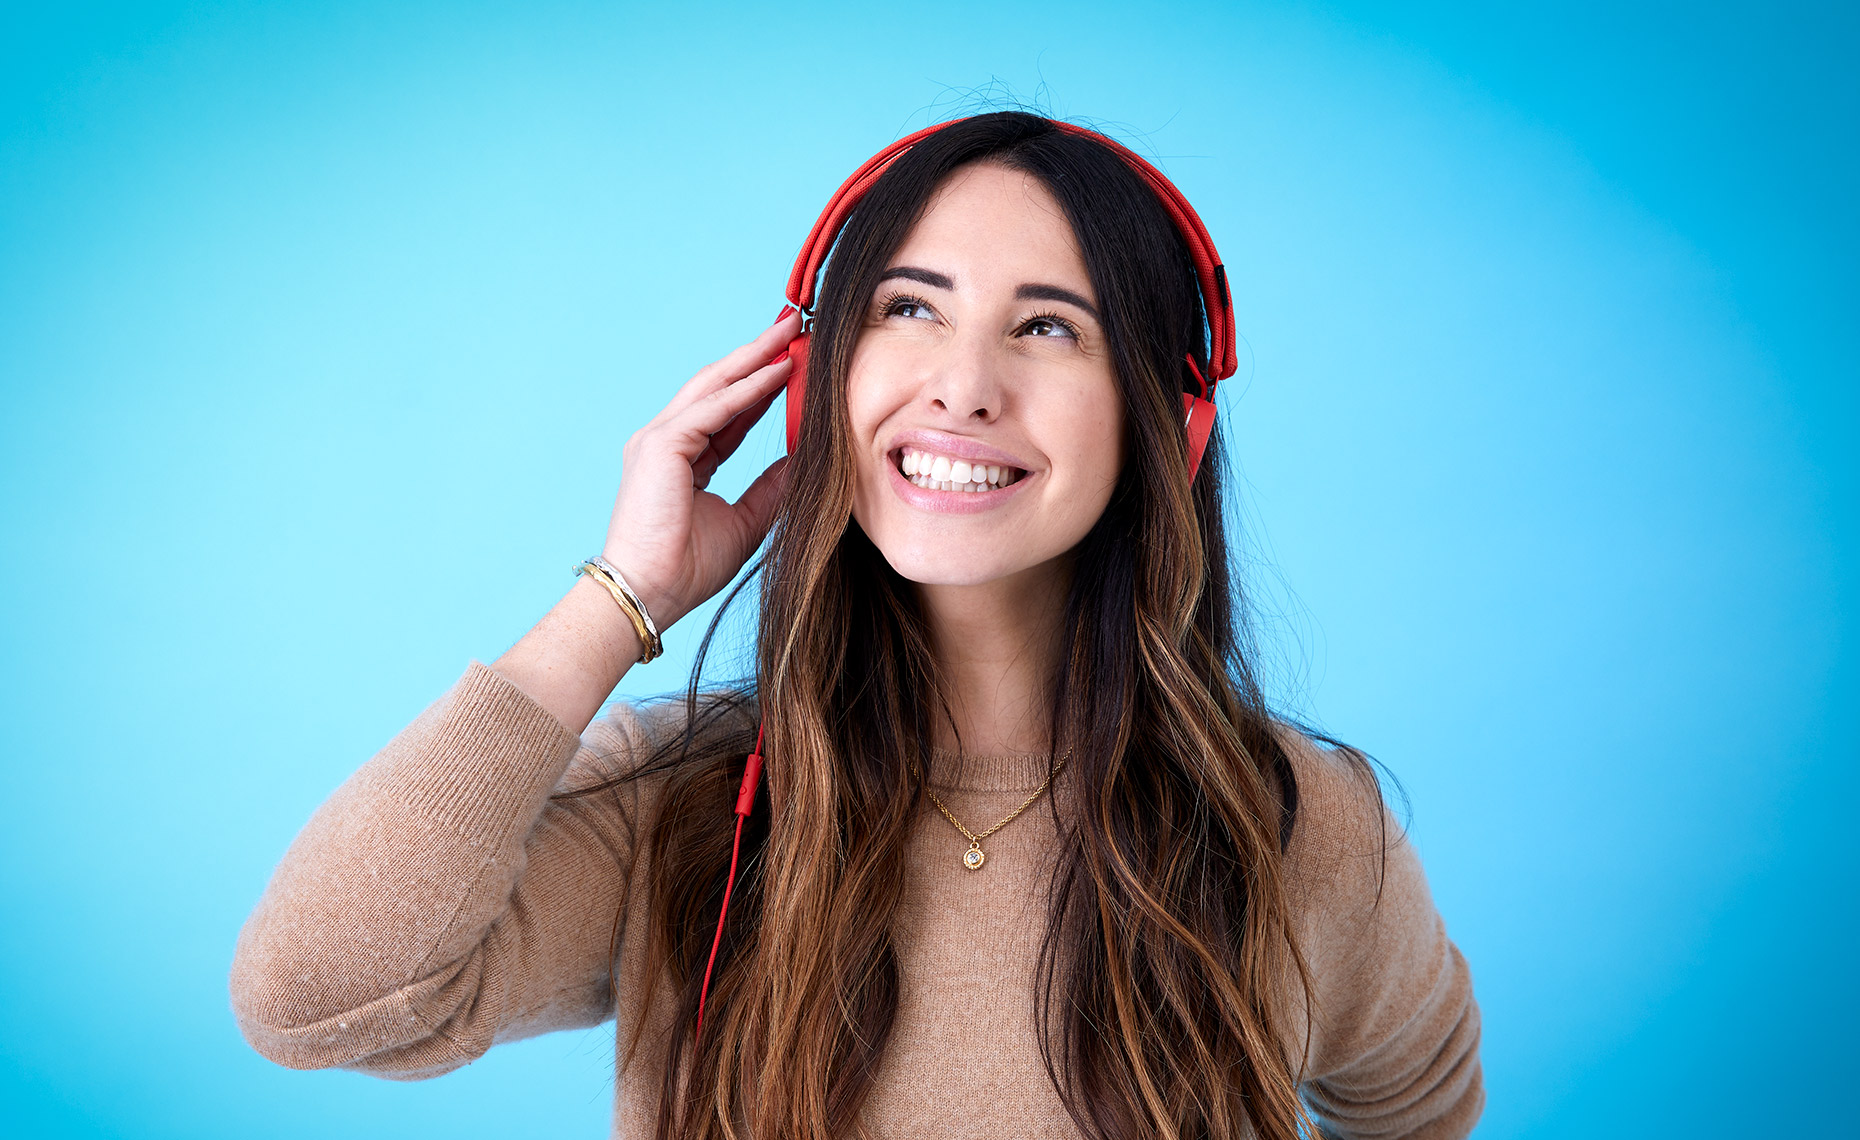 Studio shot of a happy attractive young woman listening to headphones in front of a blue background. Well lit, bright and airy.